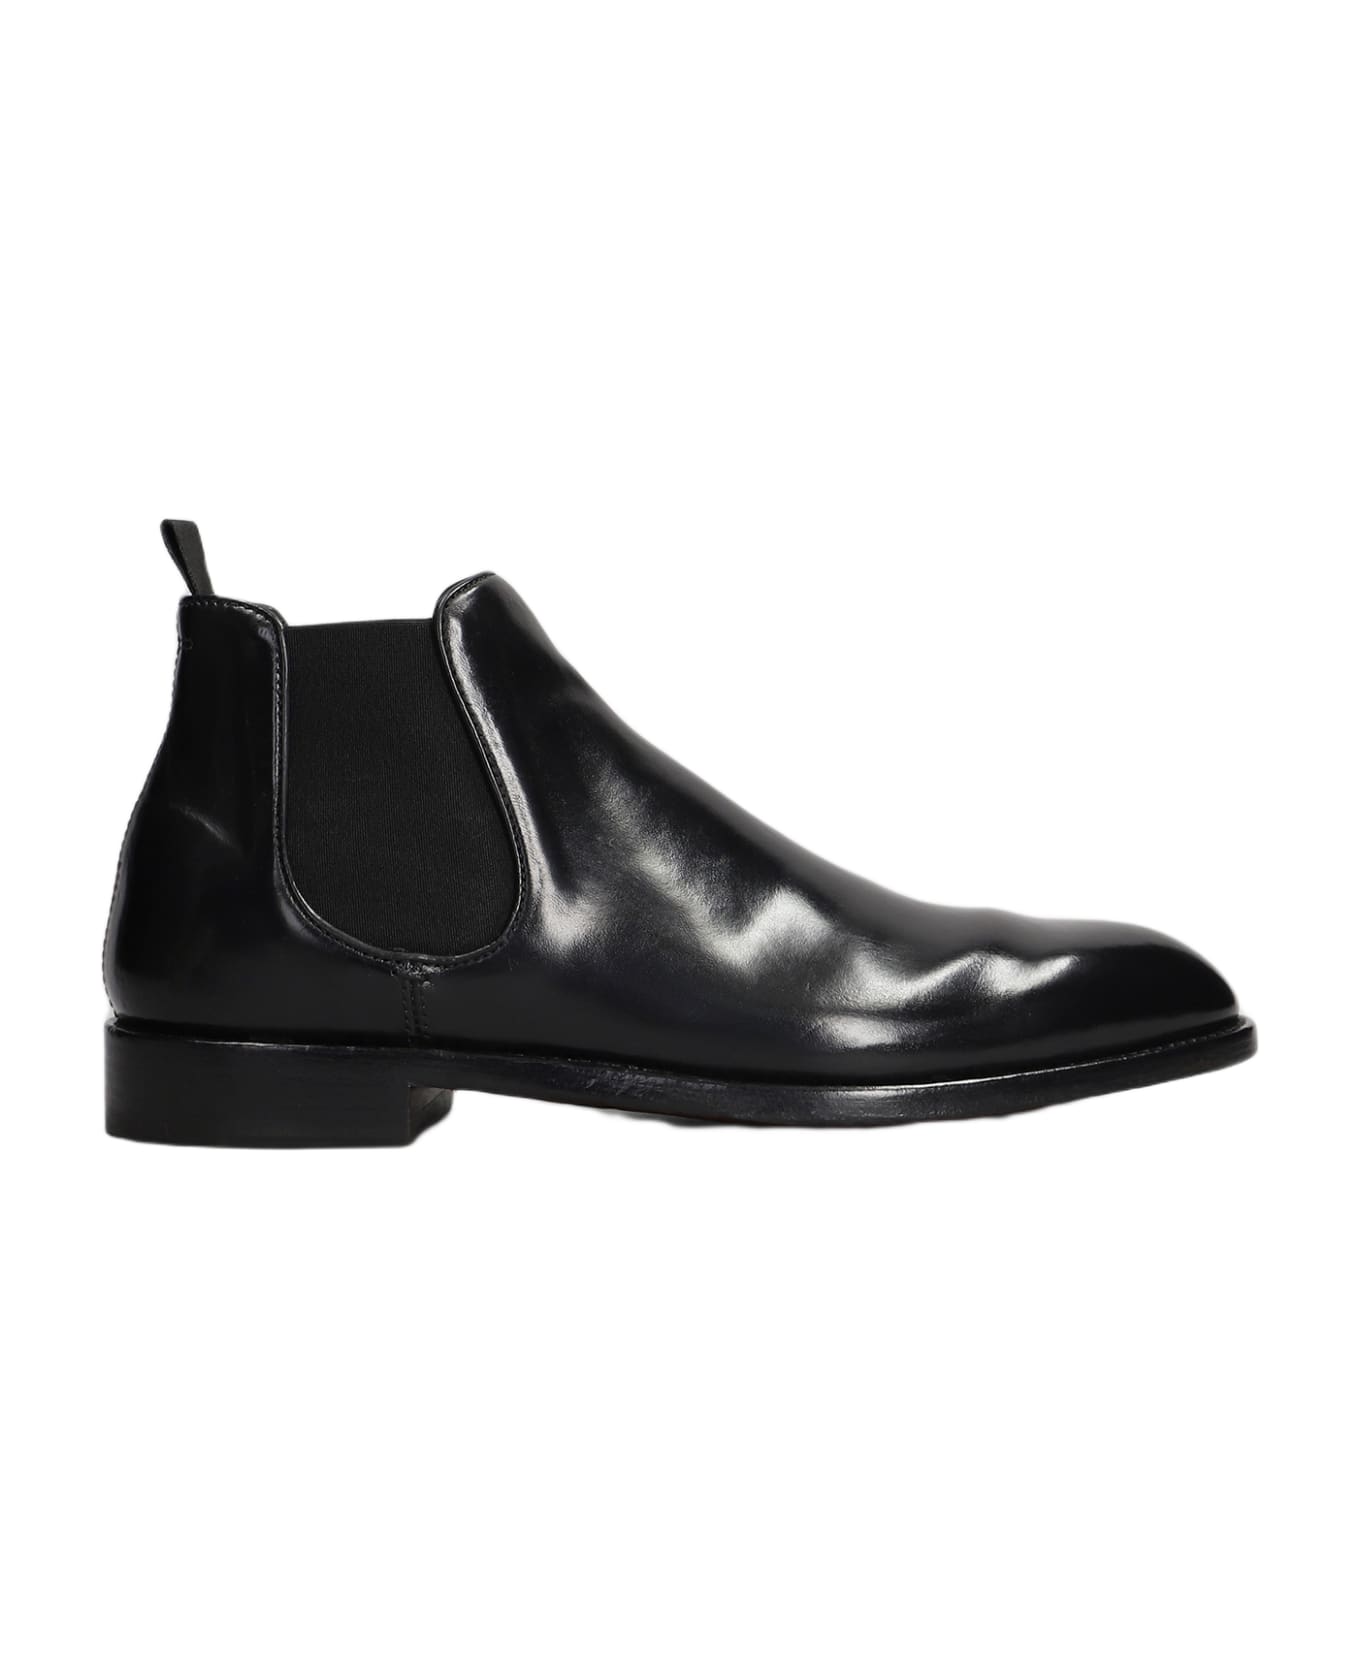 Officine Creative Signature 002 Ankle Boots In Black Leather - black